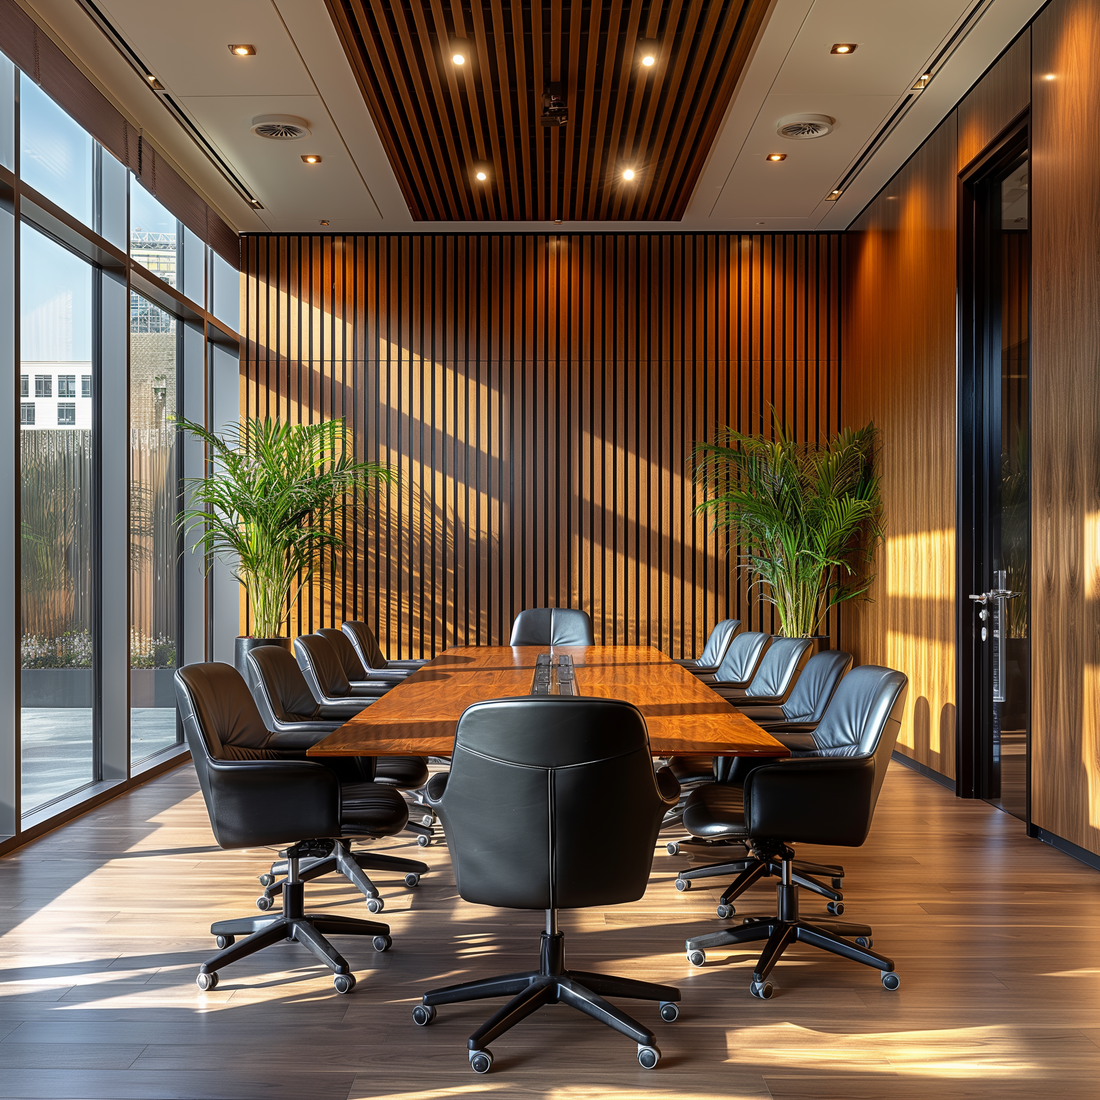 acoustic panels in office slatted wall panels